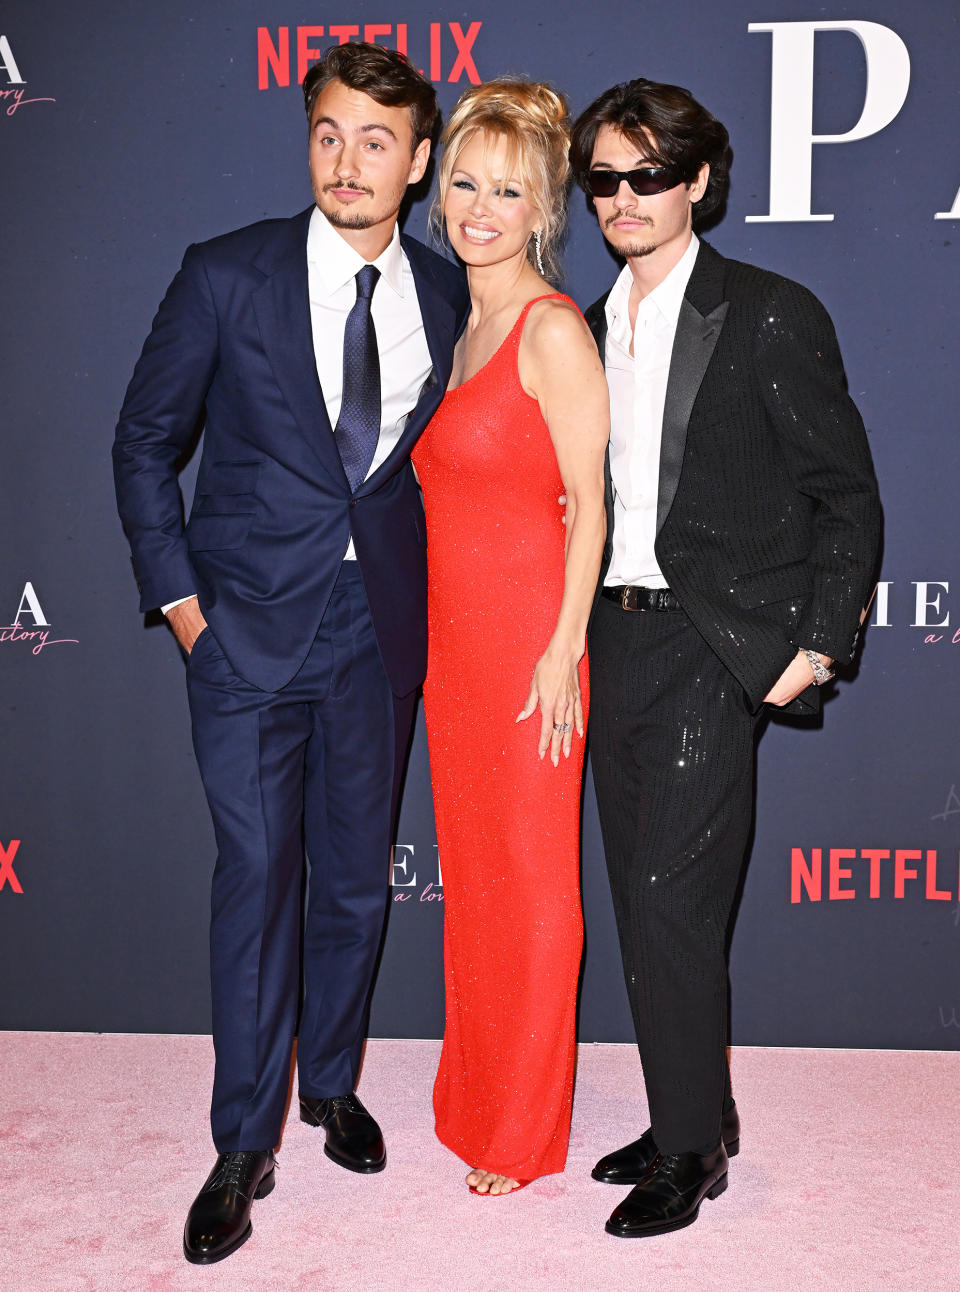 Brandon Thomas Lee, Pamela Anderson, and Dylan Jagger Lee. (Axelle/Bauer-Griffin / FilmMagic)